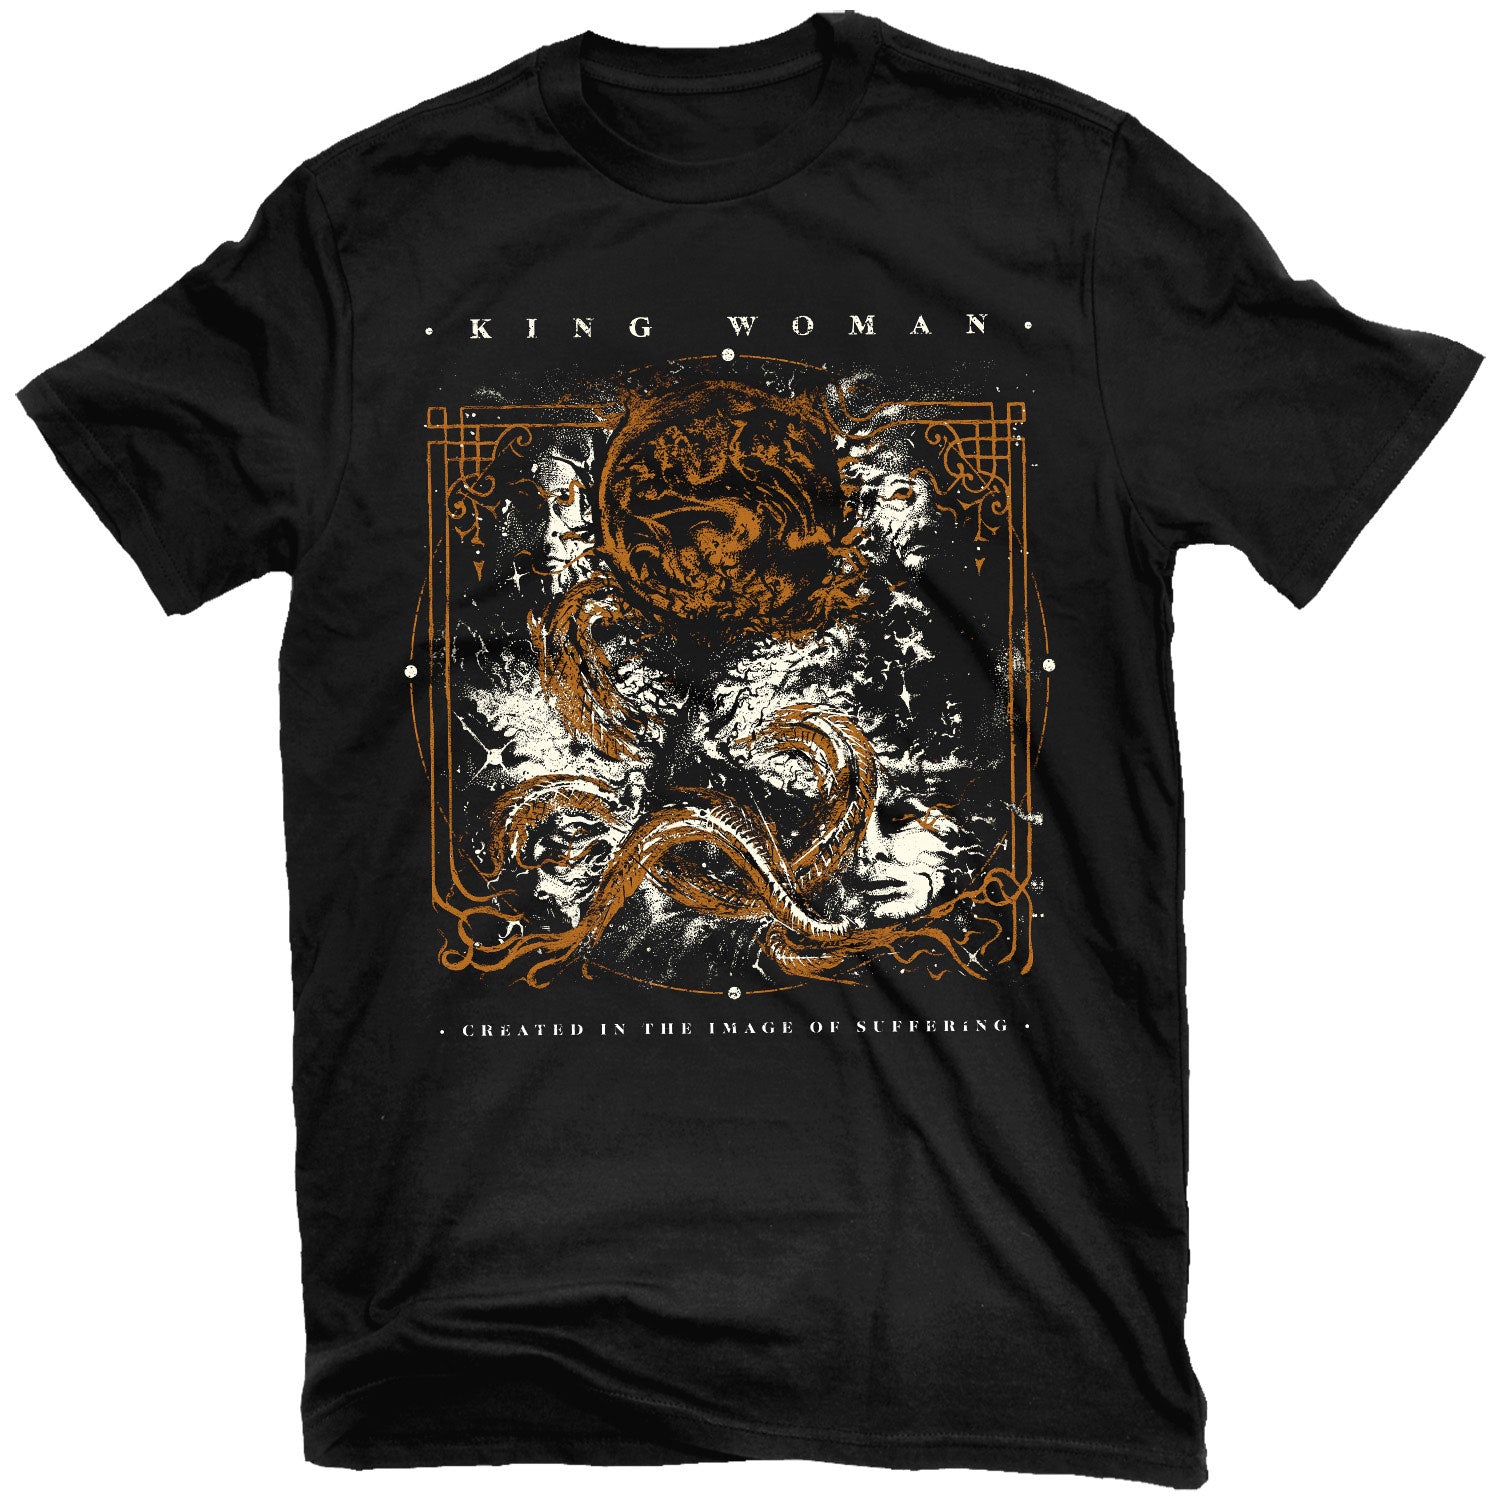 King Woman "Created in the Image of Suffering" T-Shirt